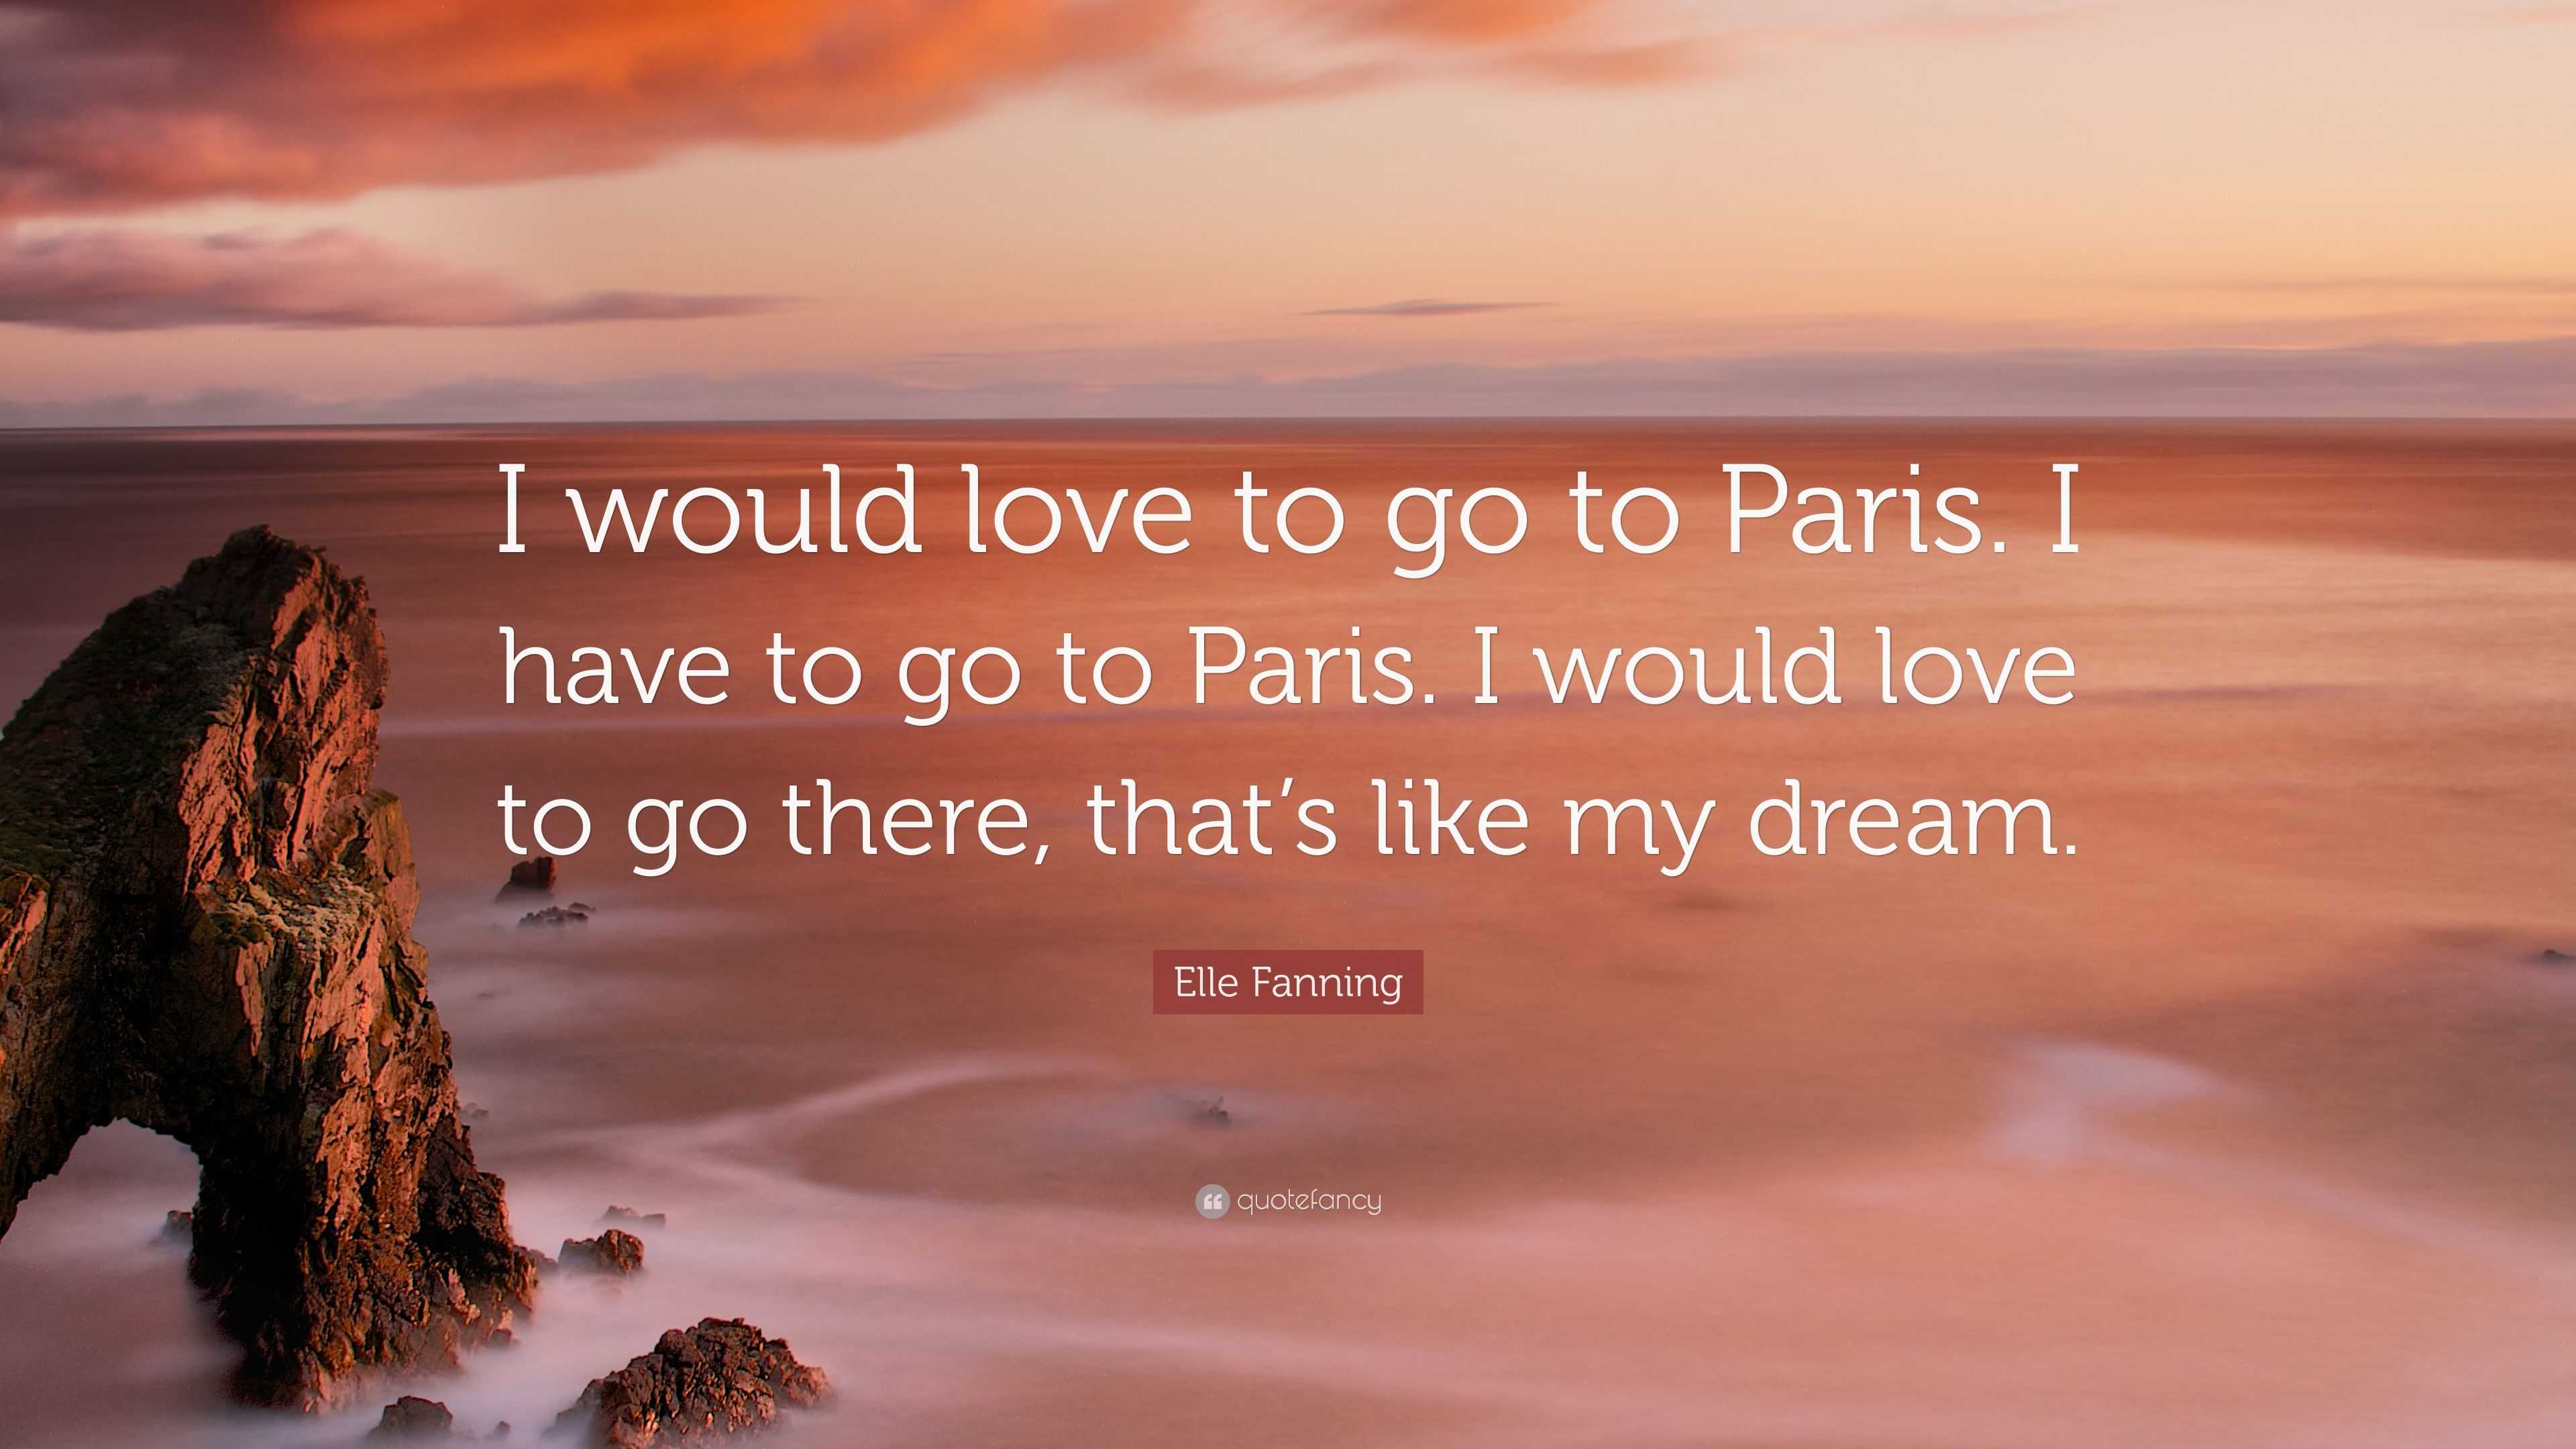 Elle Fanning Quote: “I would love to go to Paris. I have to go to Paris ...